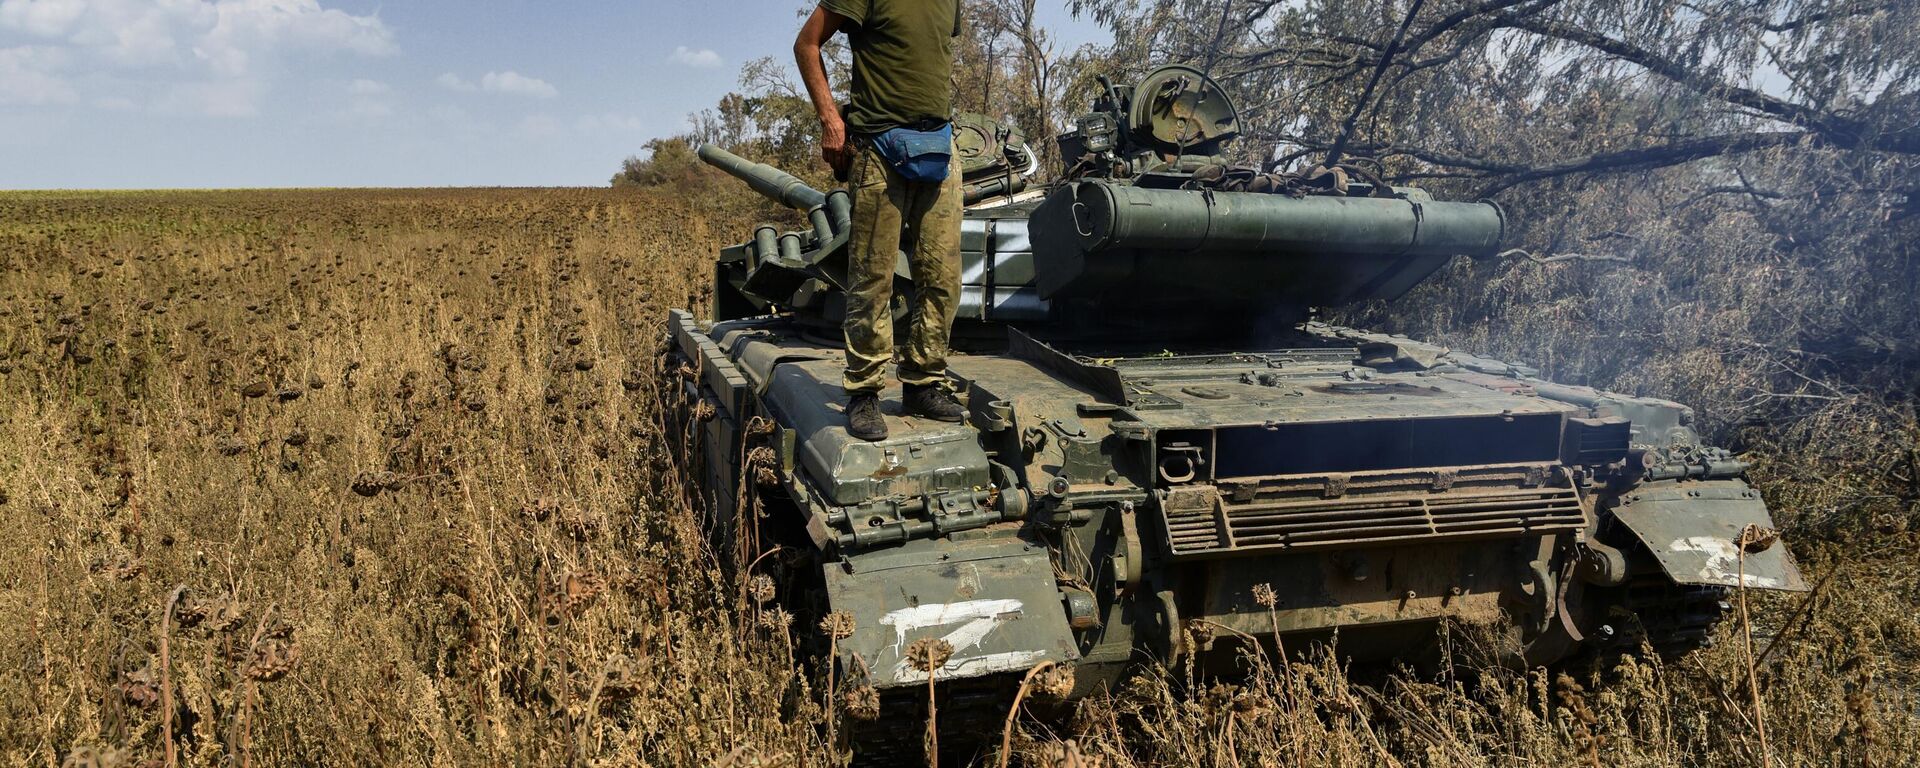 Donetsk People's Militia tank man stands on top of his T-72 main battle tank at a training ground in the Donetsk People's Republic. August 31, 2022. - Sputnik International, 1920, 01.09.2022